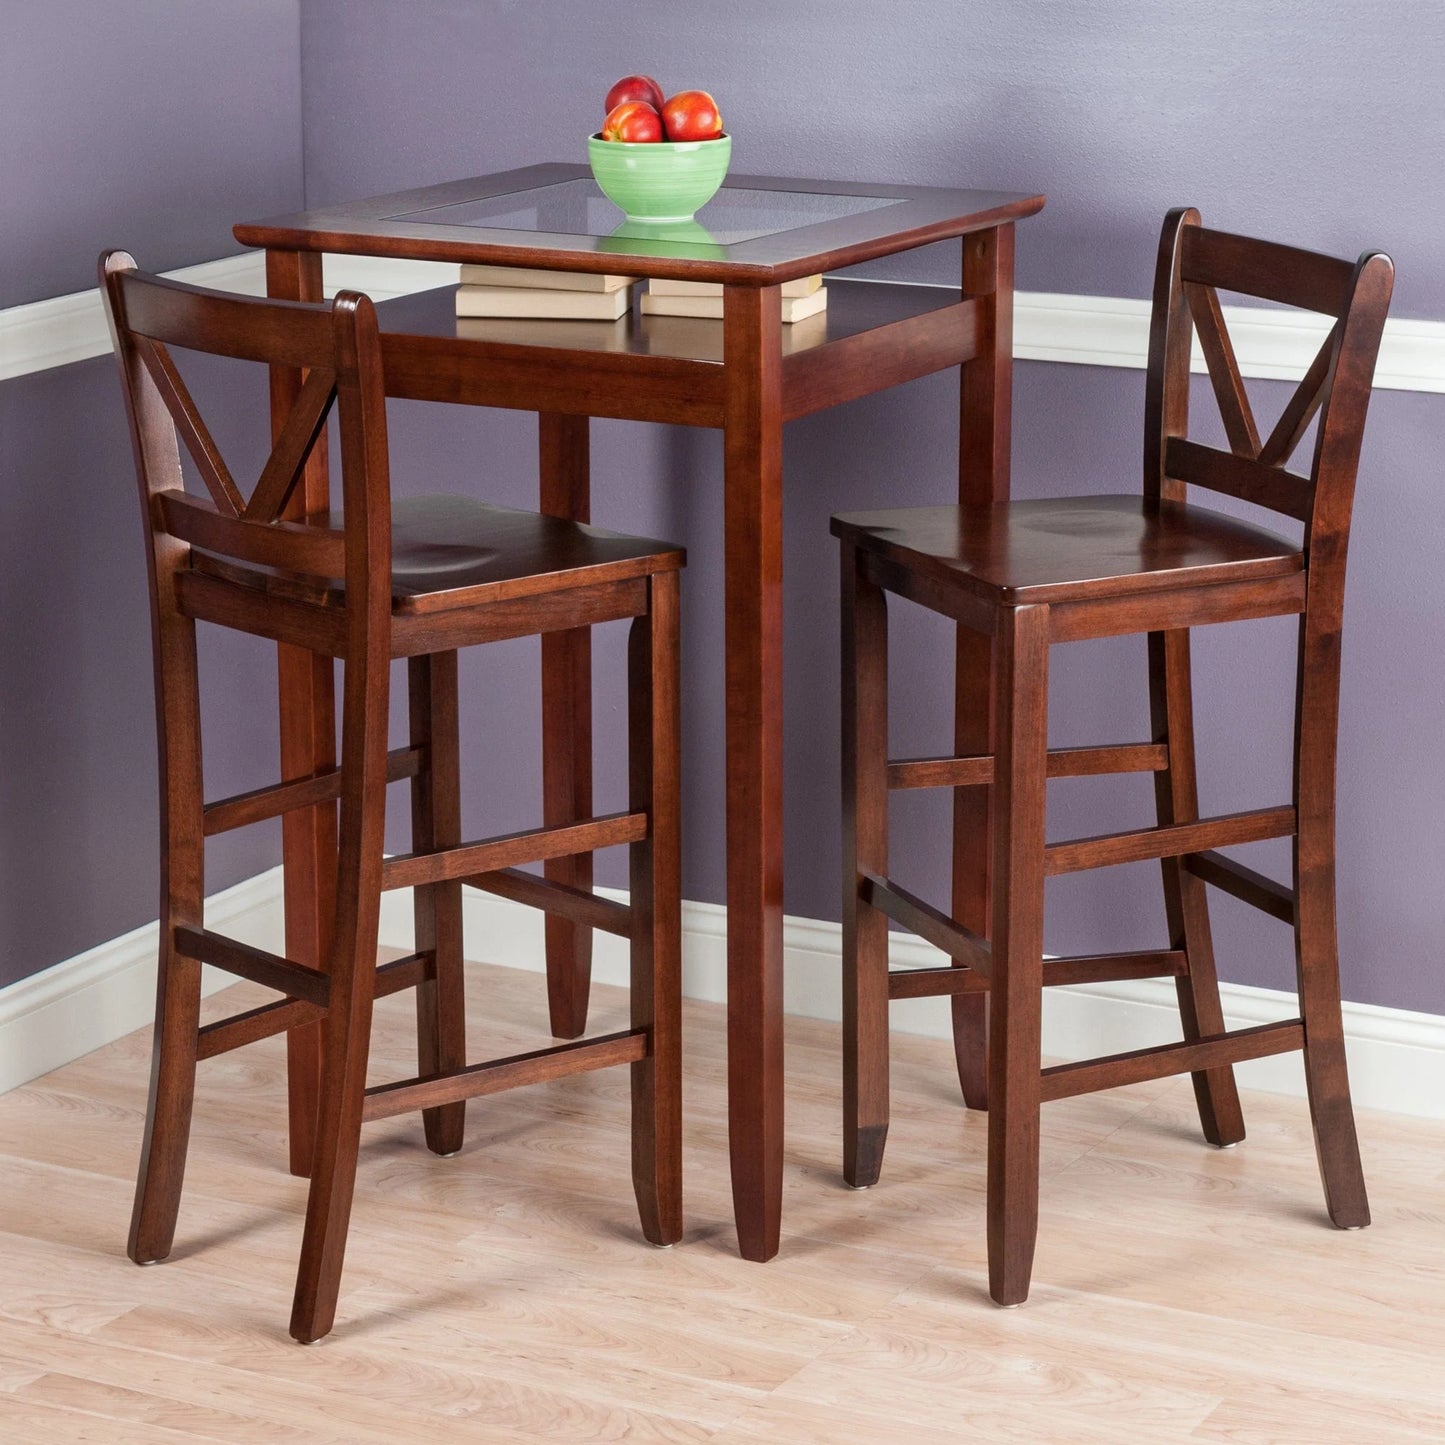 WINSOME Pub Table Set Halo 3-Pc High Table with V-Back Bar Stools, Walnut